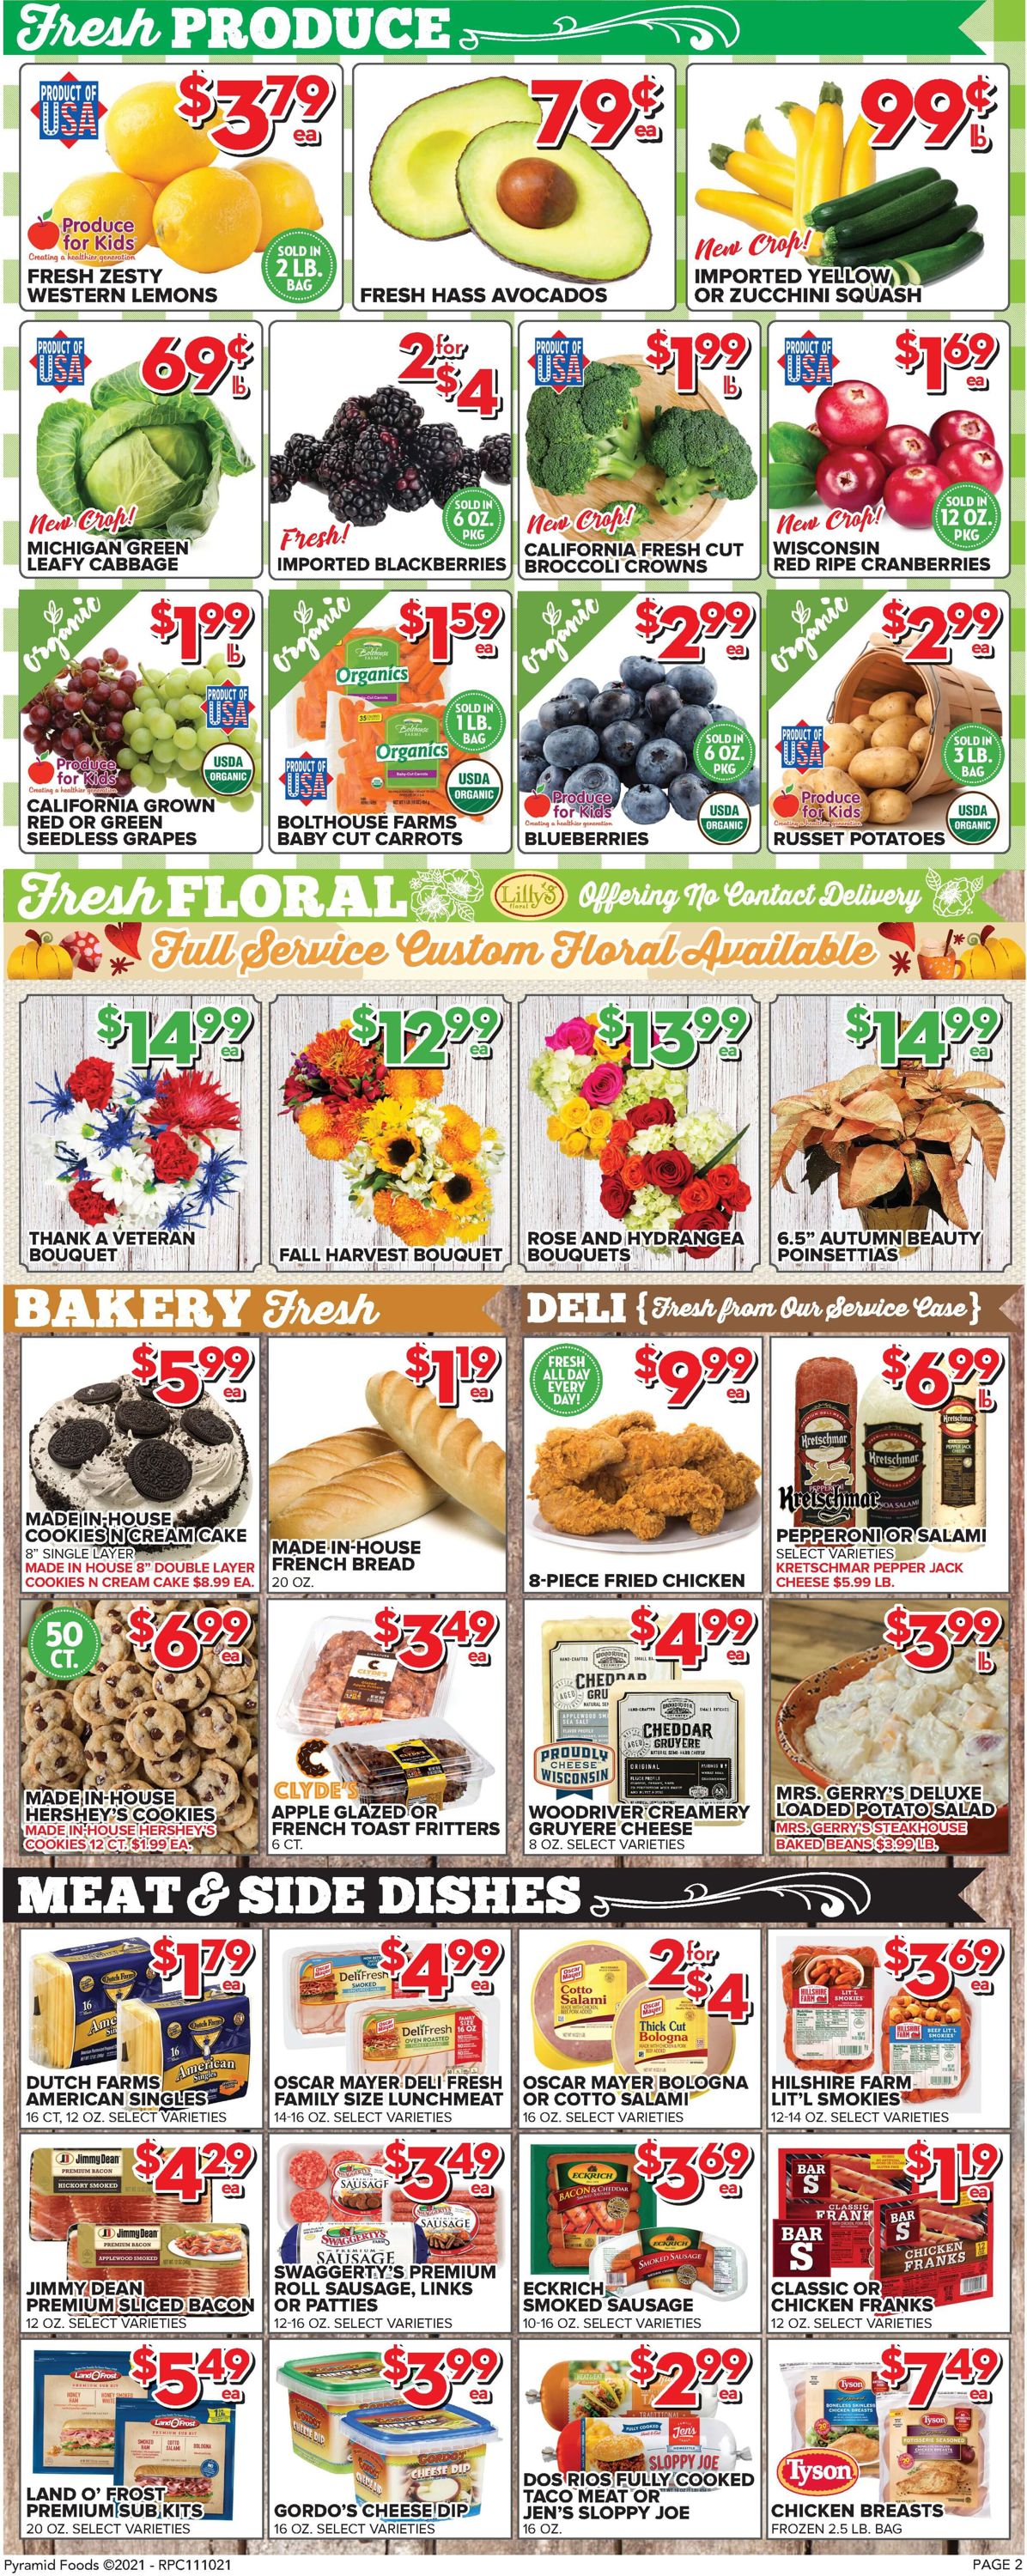 Price Cutter HOLIDAY 2021 Weekly Ad Circular - valid 11/10-11/16/2021 (Page 2)